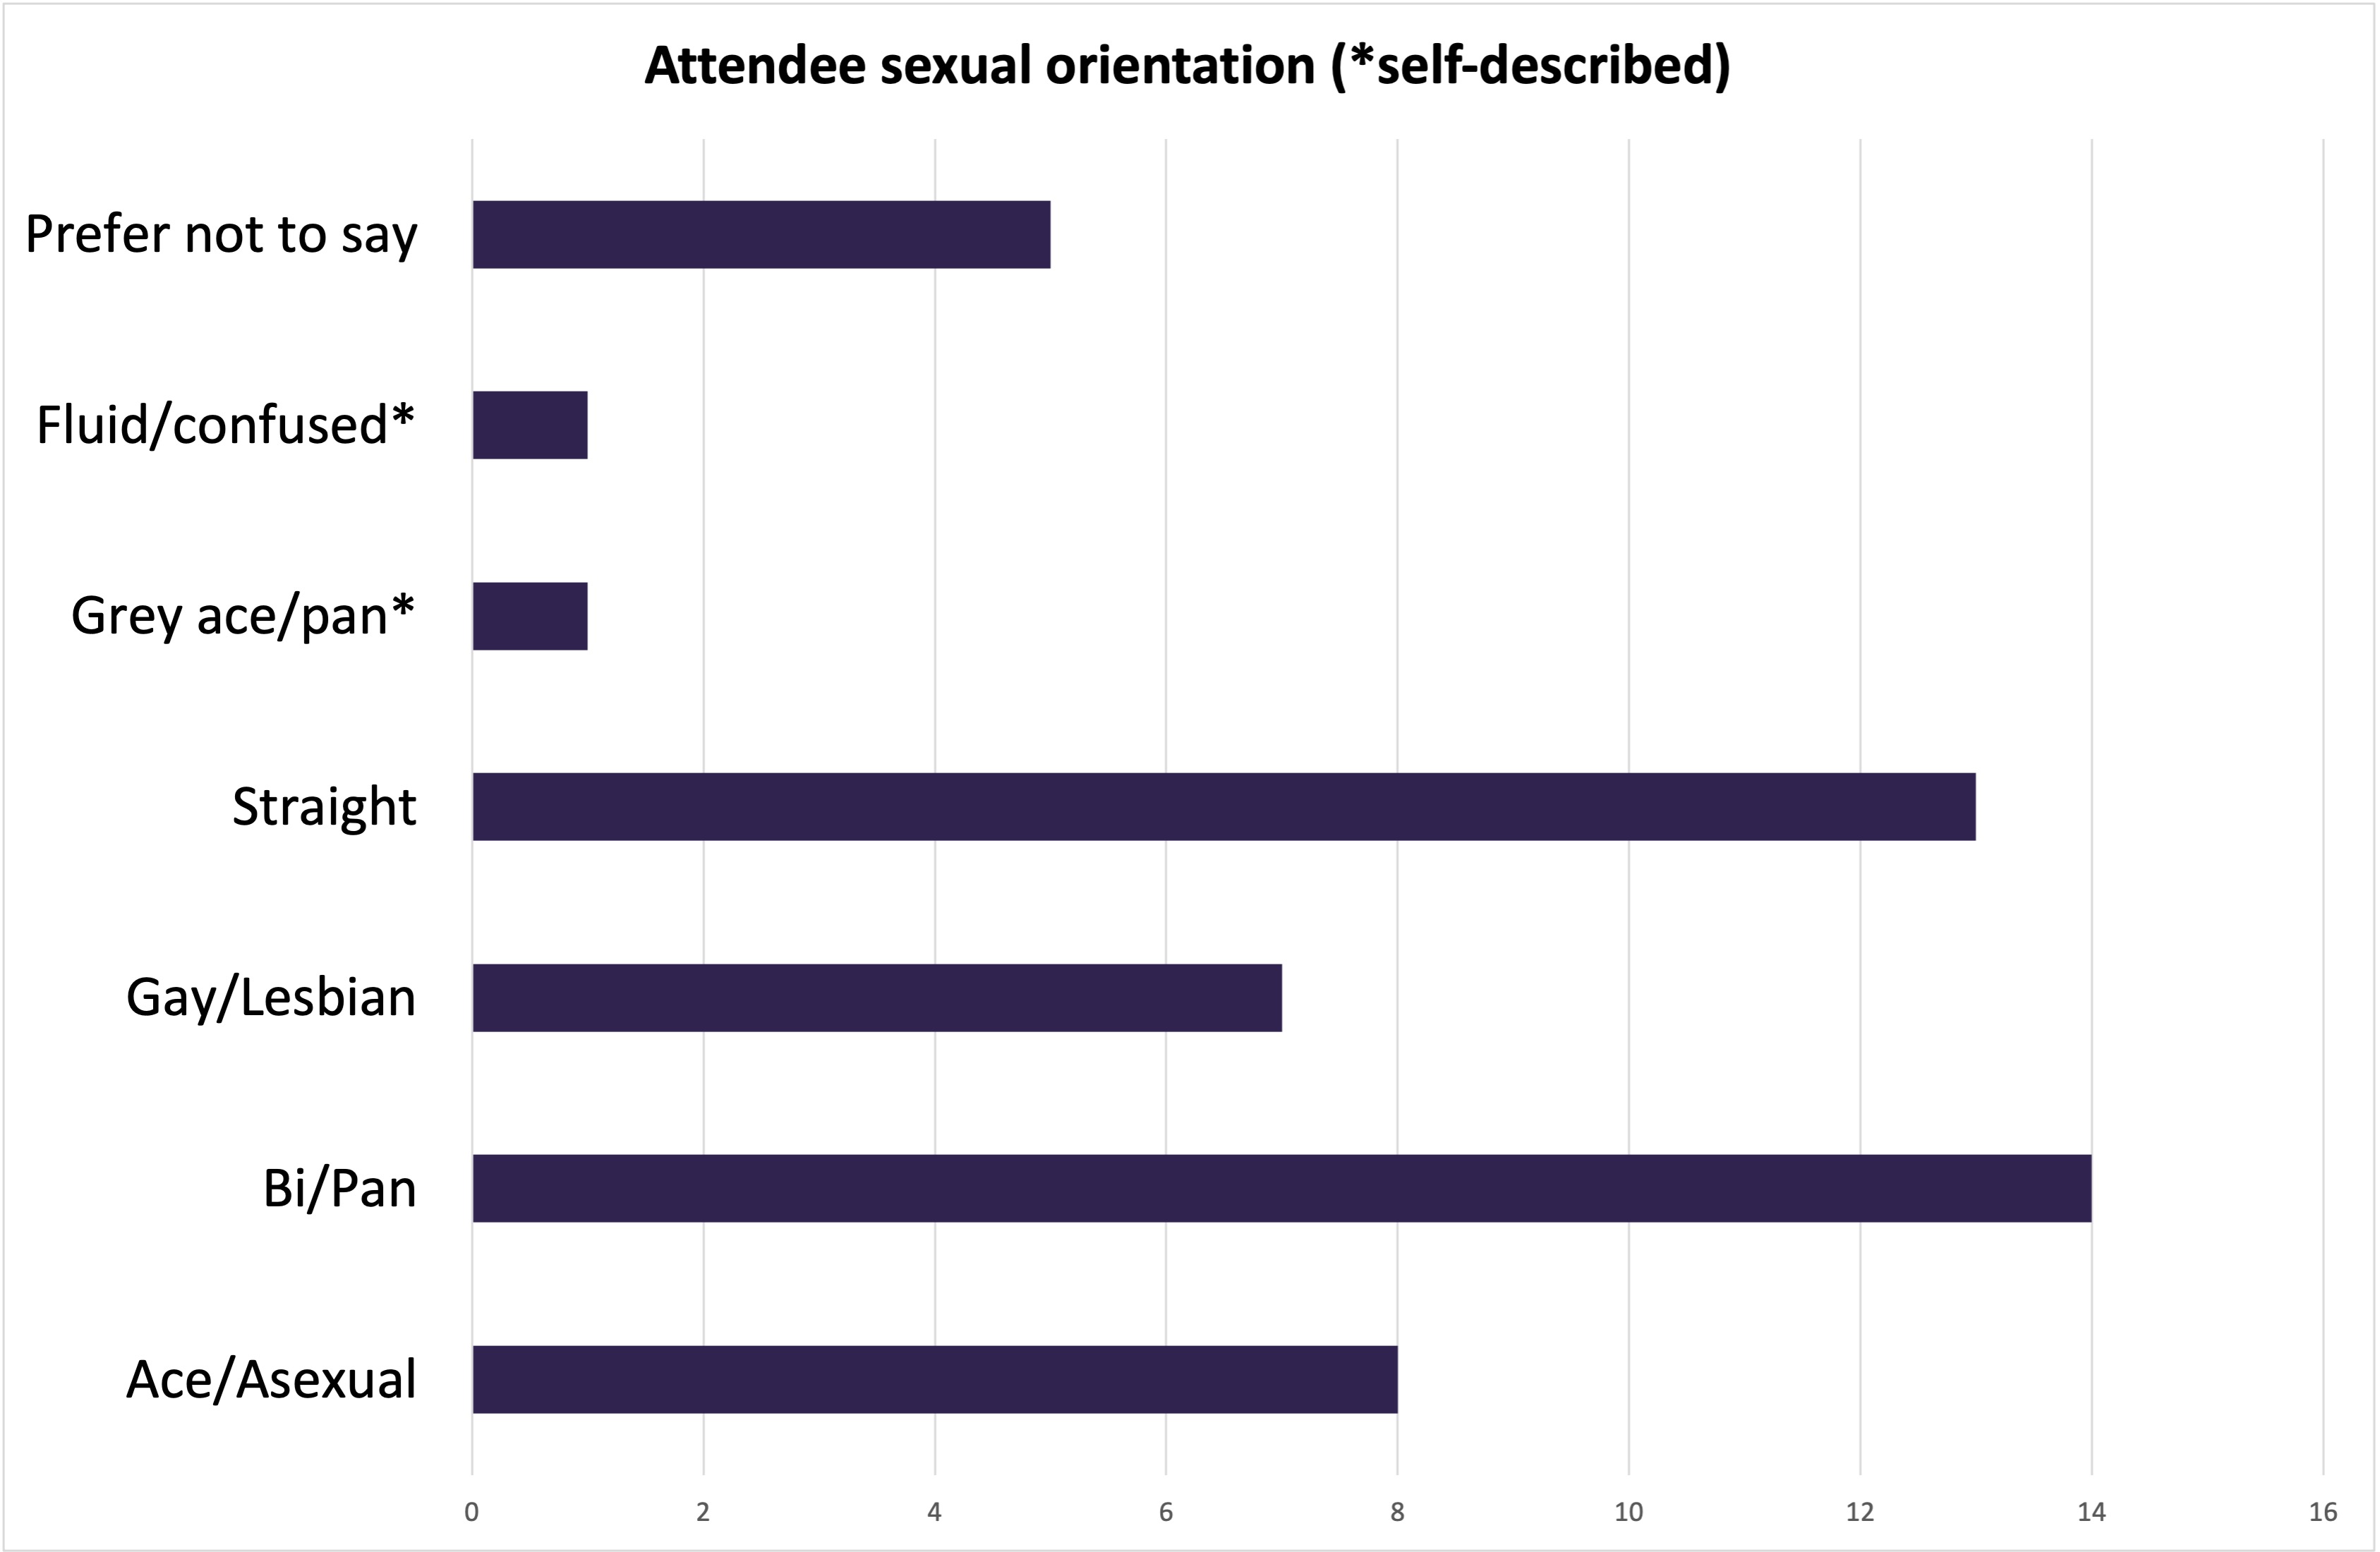 Bar chart of registrants' identities: 8 were ace/asexual; 14 were bi/pan; 7 were gay/lesbian; 13 were straight; 1 was grey ace/pan; 1 was fluid/confused; 5 preferred not to say.